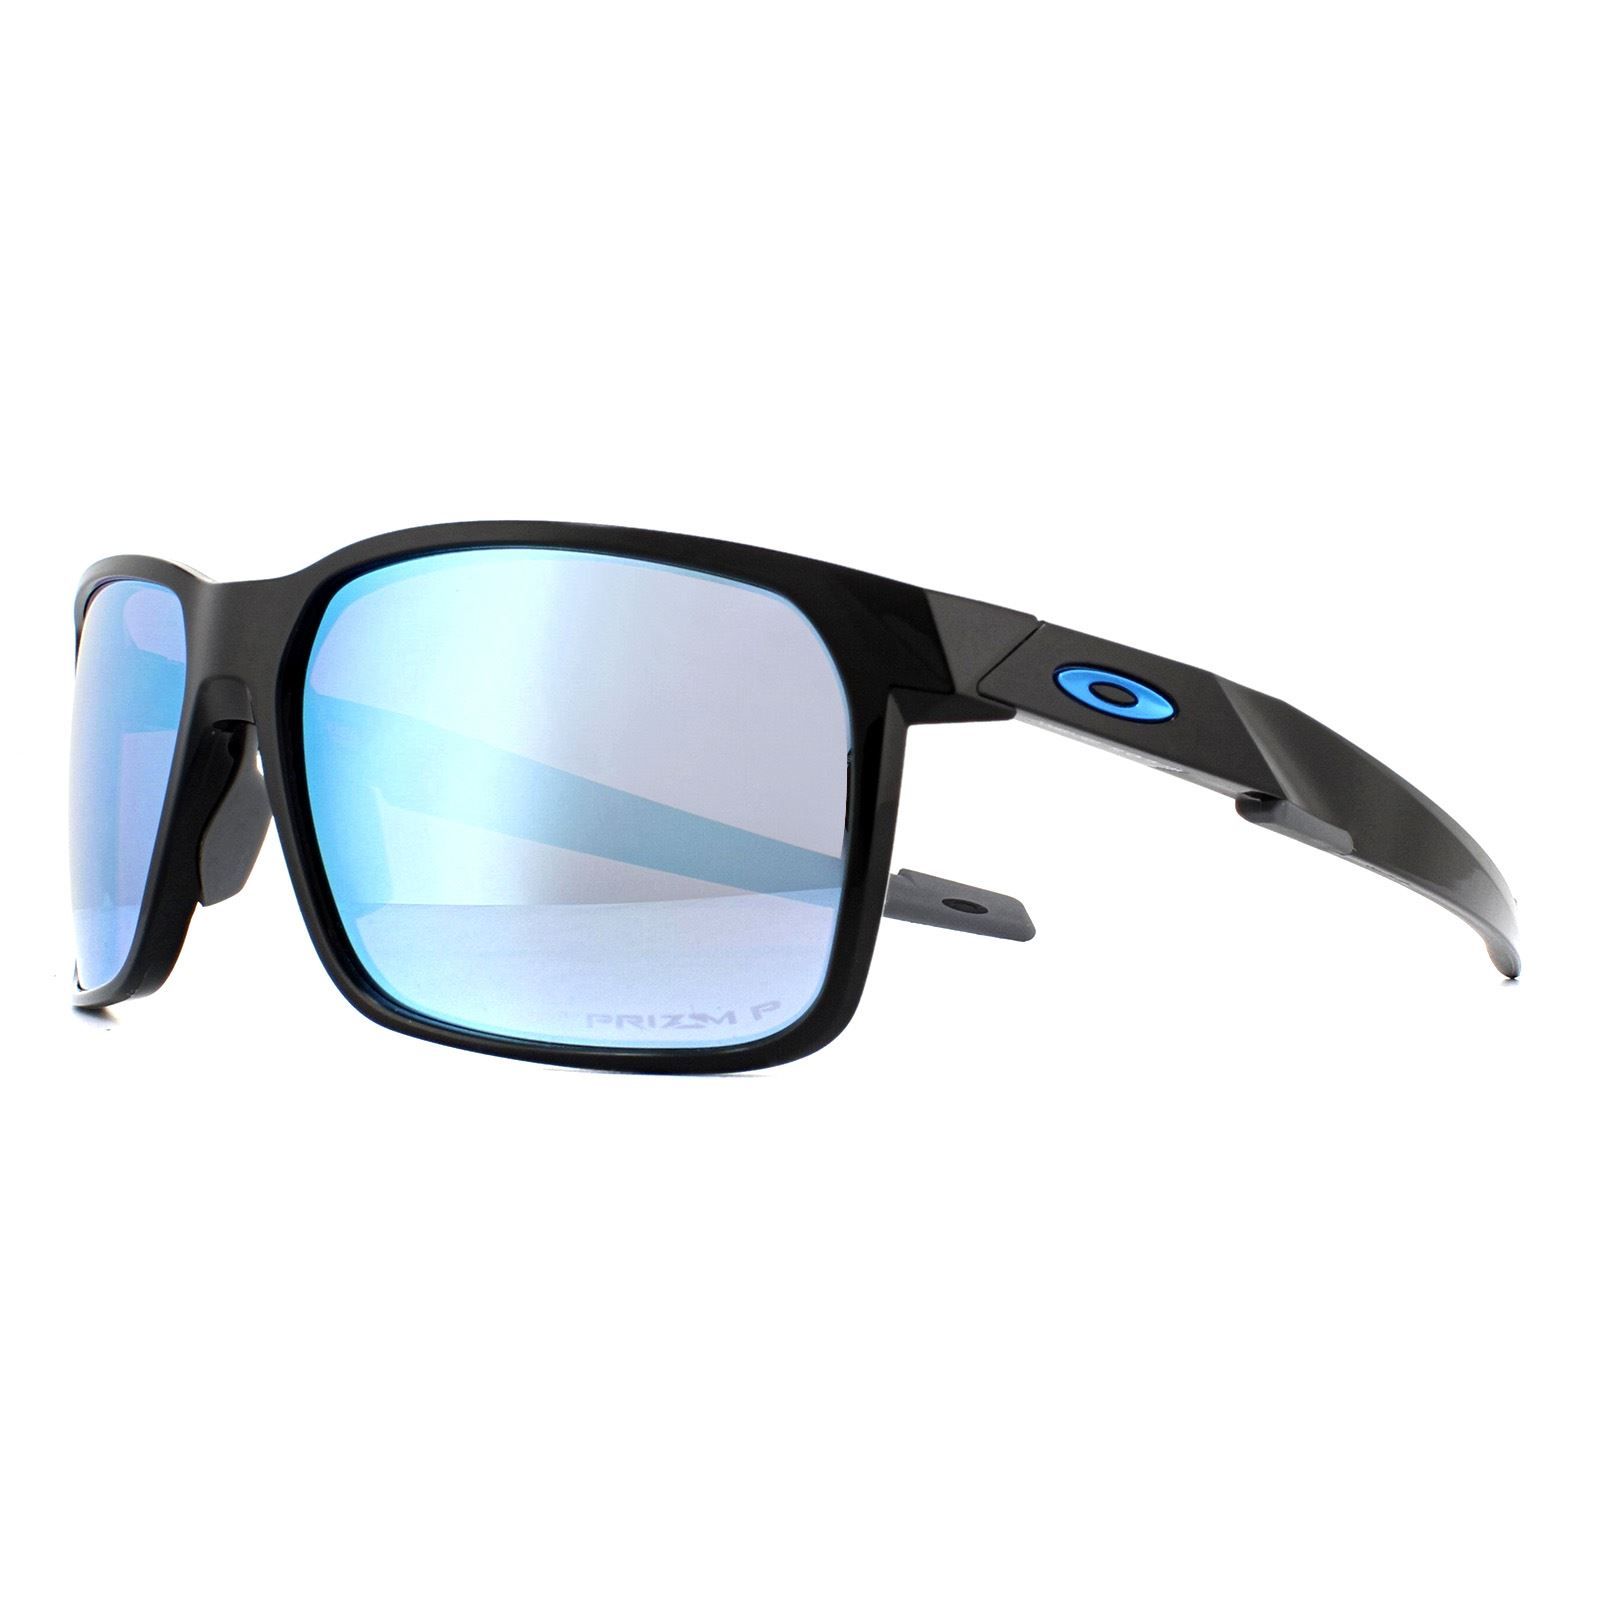 Oakley Sunglasses Portal X OO9460-04 Polished Black Prizm Deep H2O Polarized are a medium fit sporty style with a wrapped shape but with enough sculptured features to make them suitable for any situation as well as for extreme sports. Unobtanium temples and nose pads complete the comfortable and sporty package.